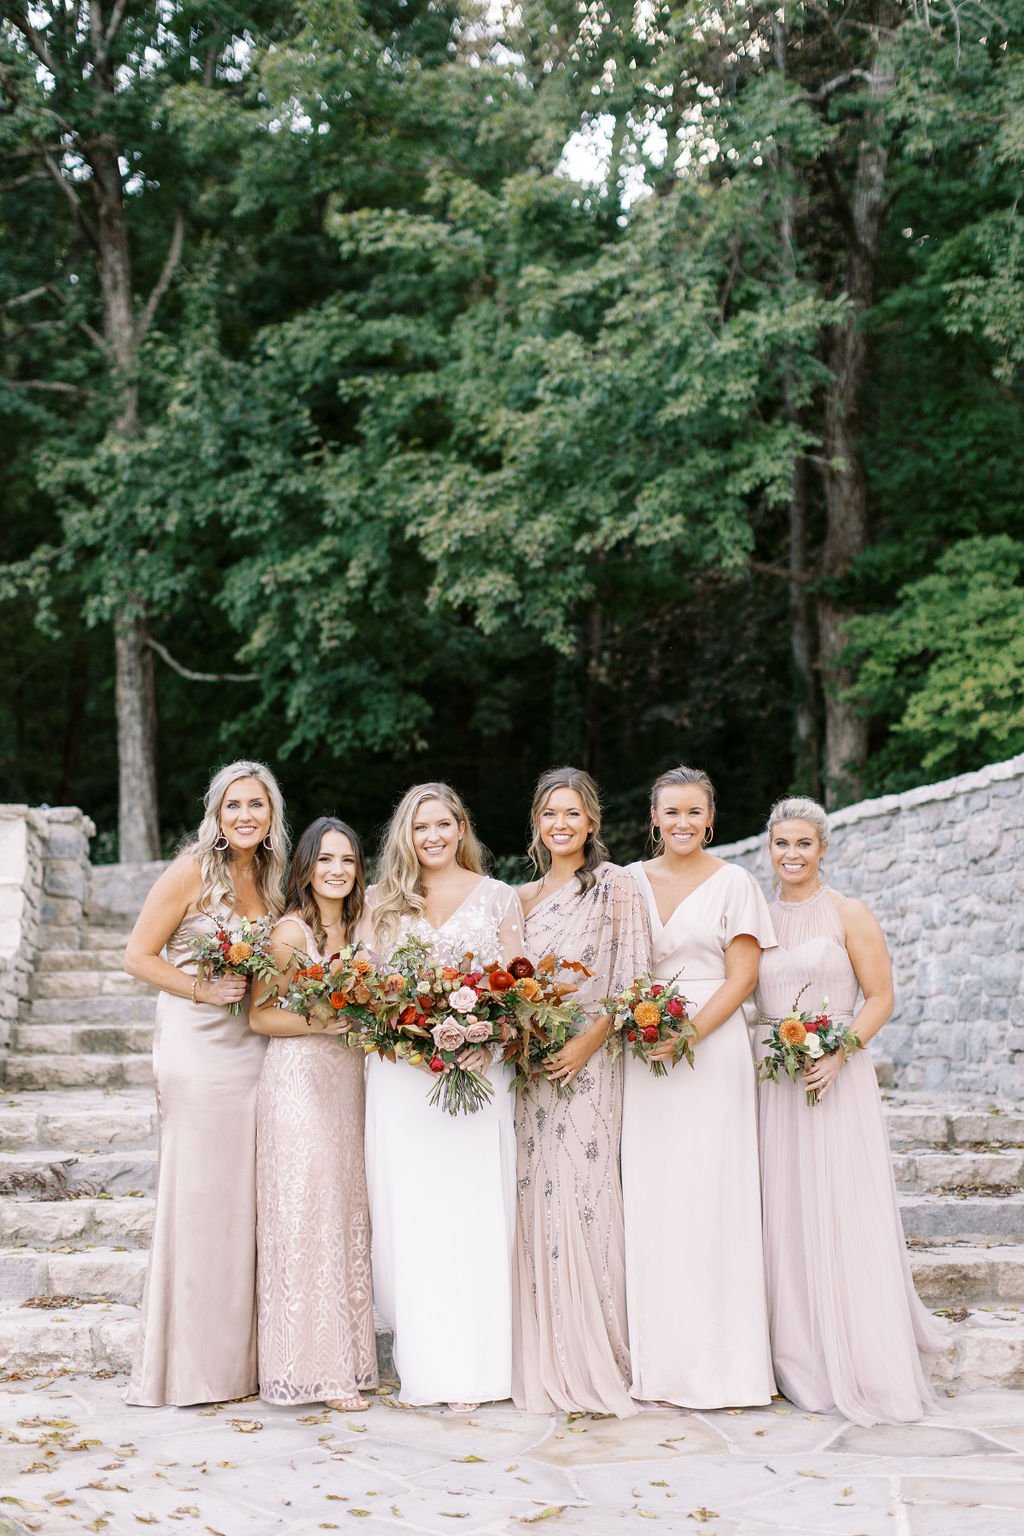 Sweet bridesmaid bouquet comprised of greenery, burnt orange, cream and pops of burgundy flowers featuring ranunculus, garden roses and dahlias. Floral Design by Rosemary and Finch in Nashville, TN.